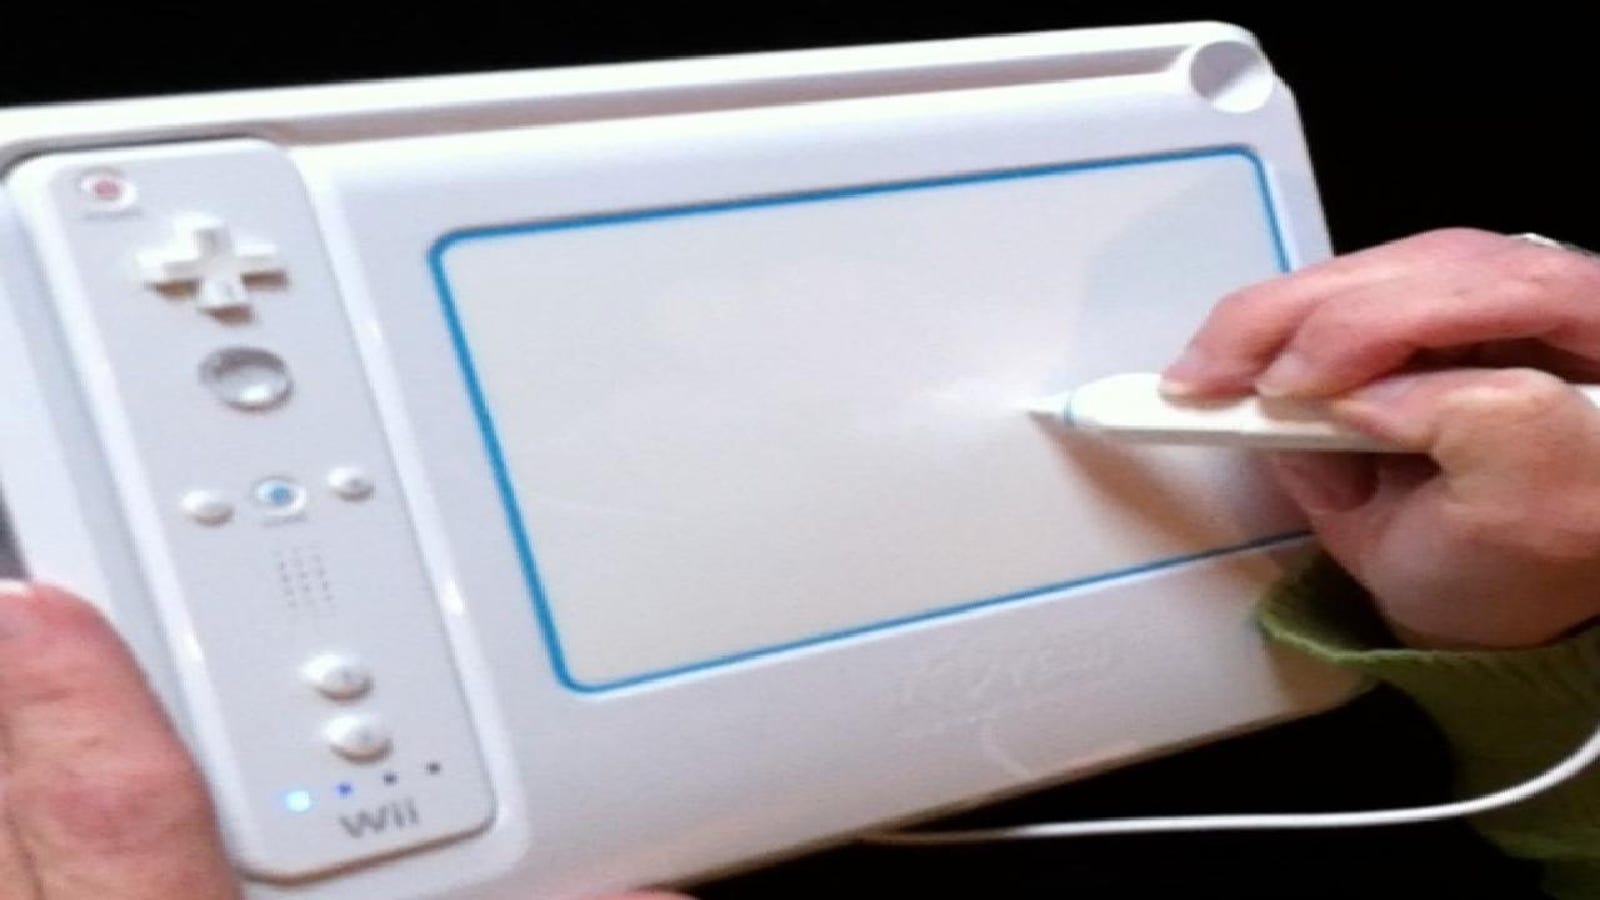 The Wii Drawing Tablet Might Be The Best Wacky Wii Peripheral